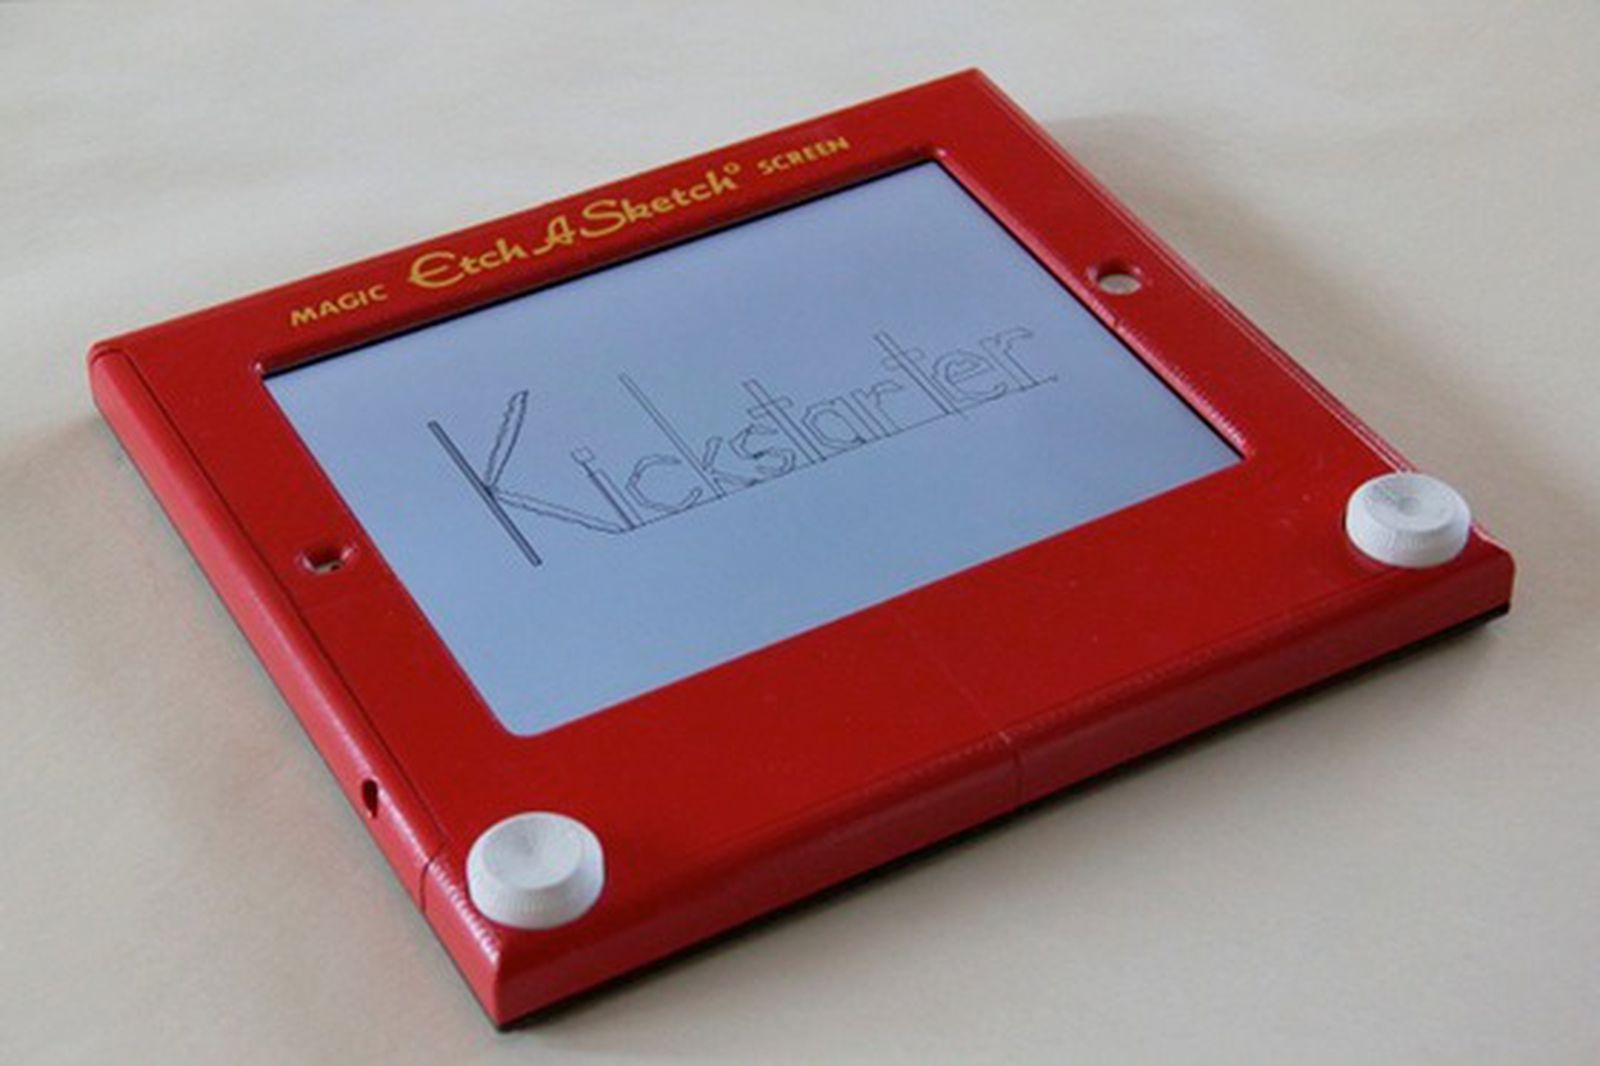 Etch A Sketch turns 50: amazing art created with the drawing toy